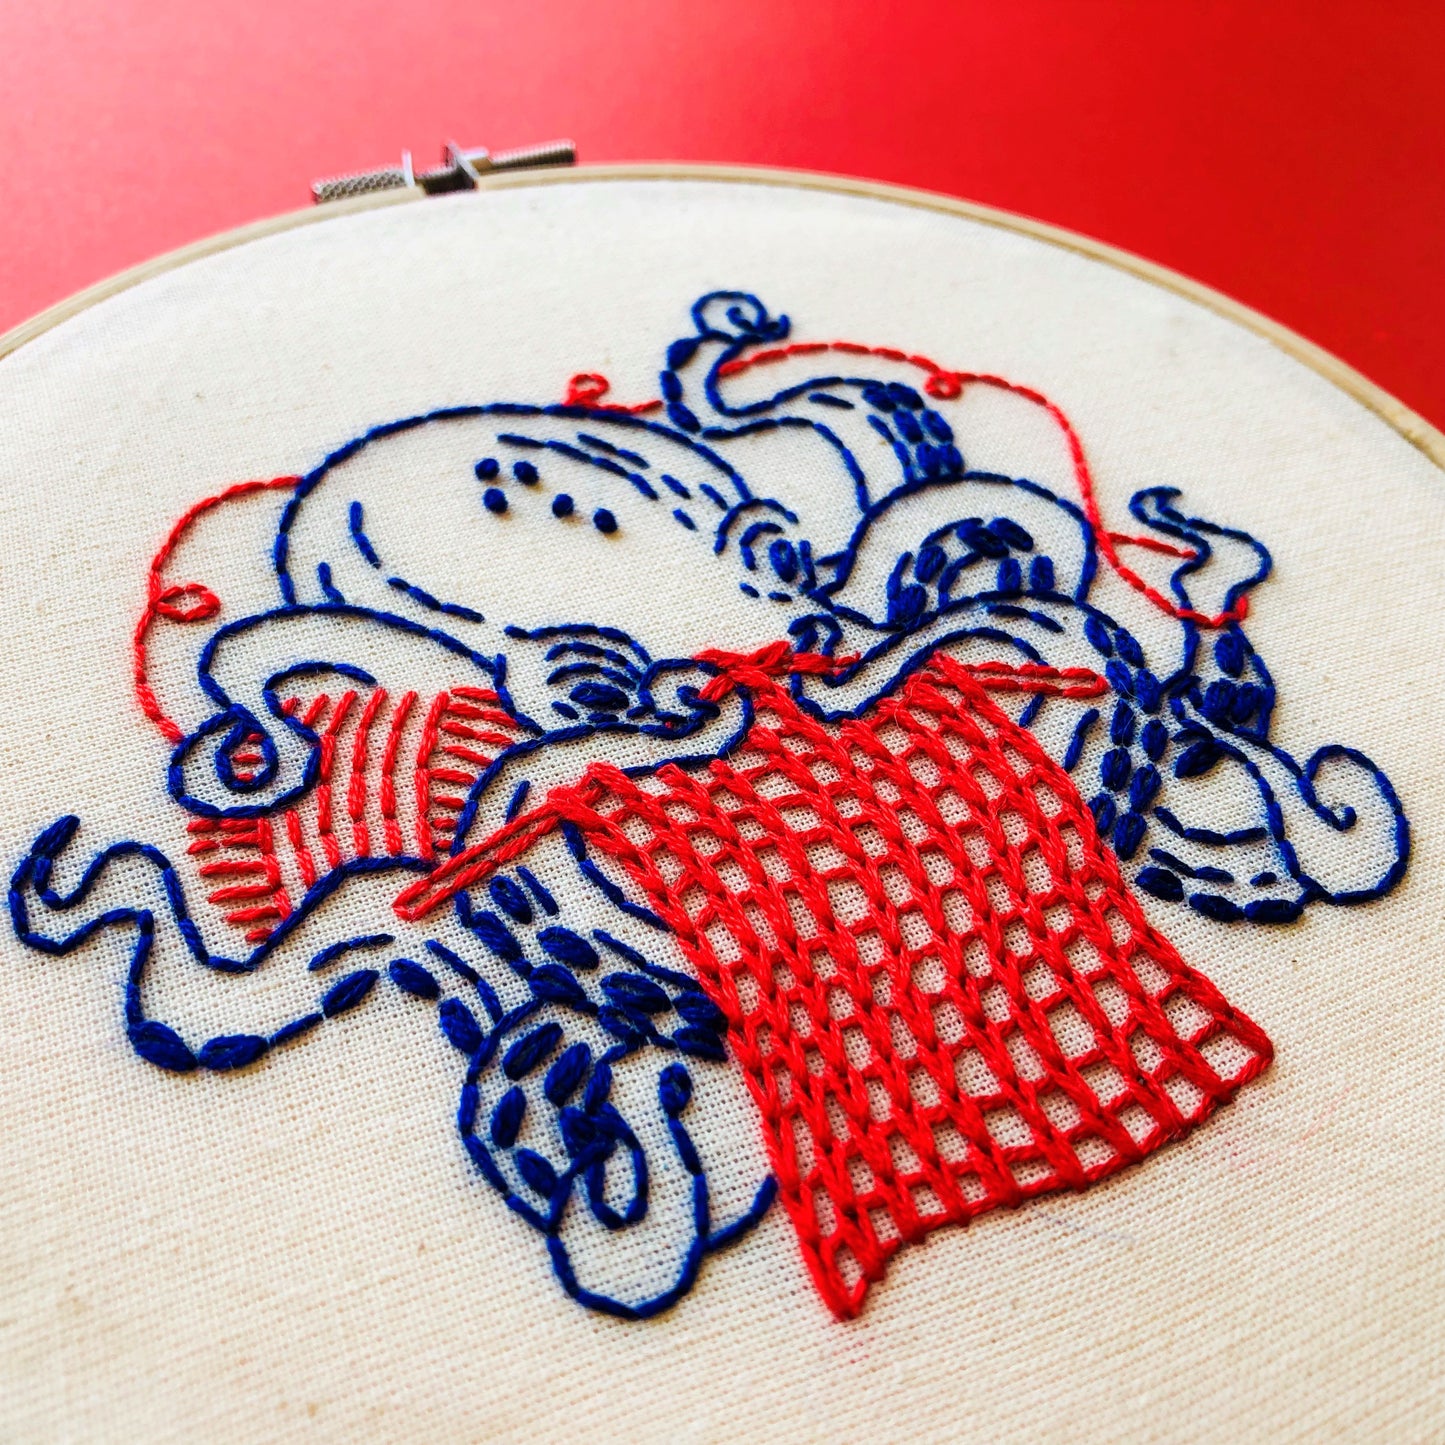 Pre-Printed Fabric: Knitting Octopus